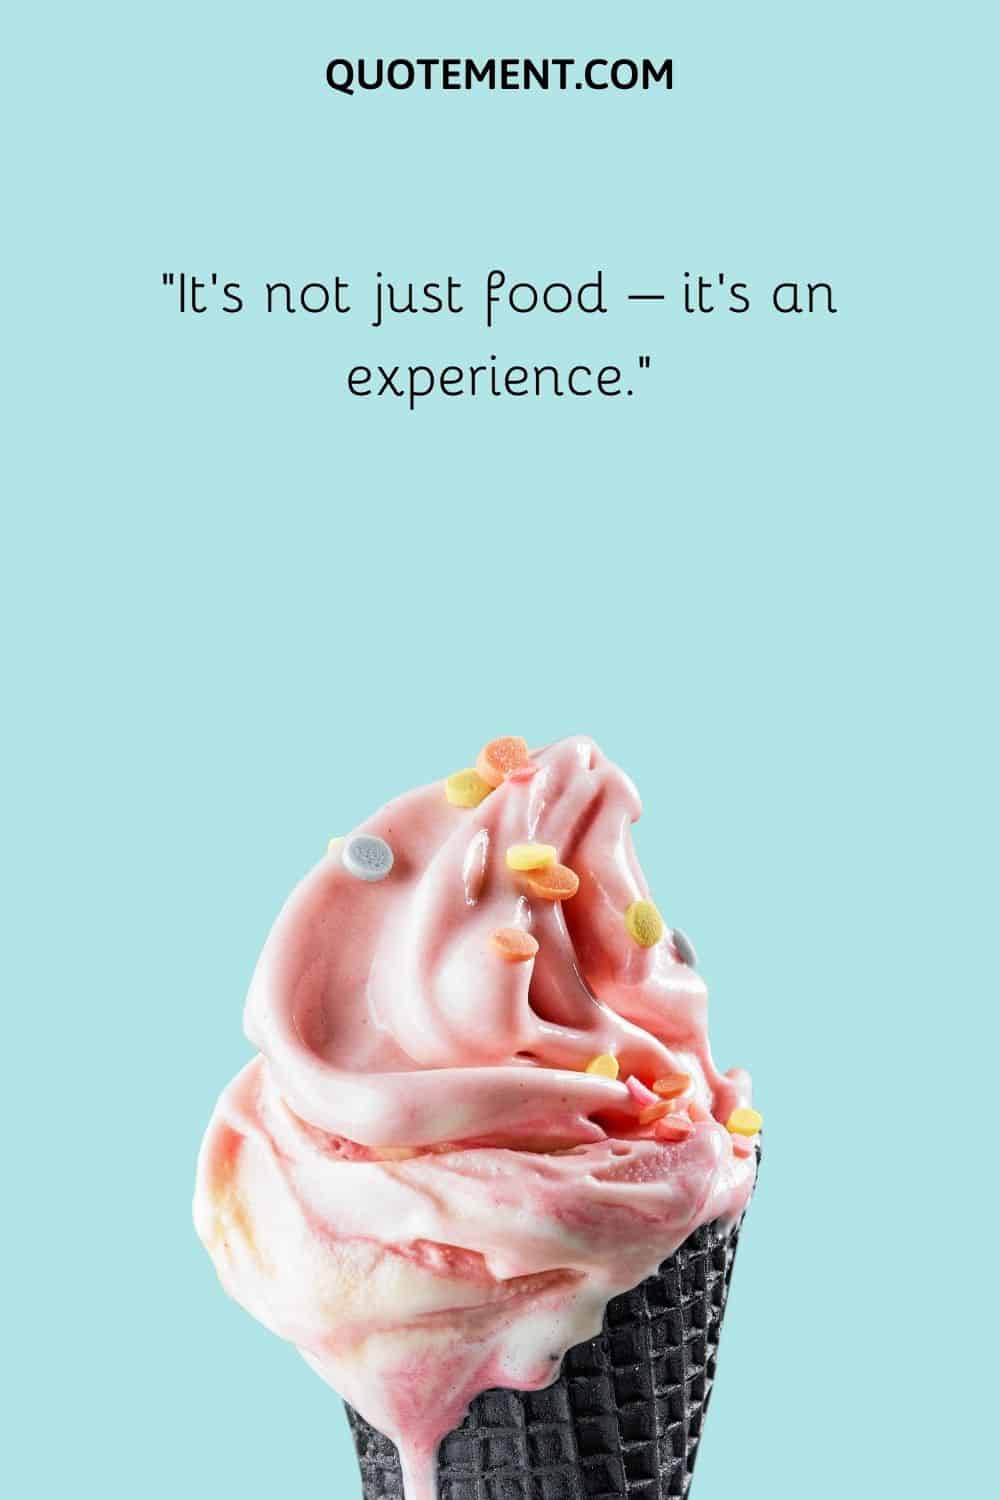 It’s not just food – it’s an experience